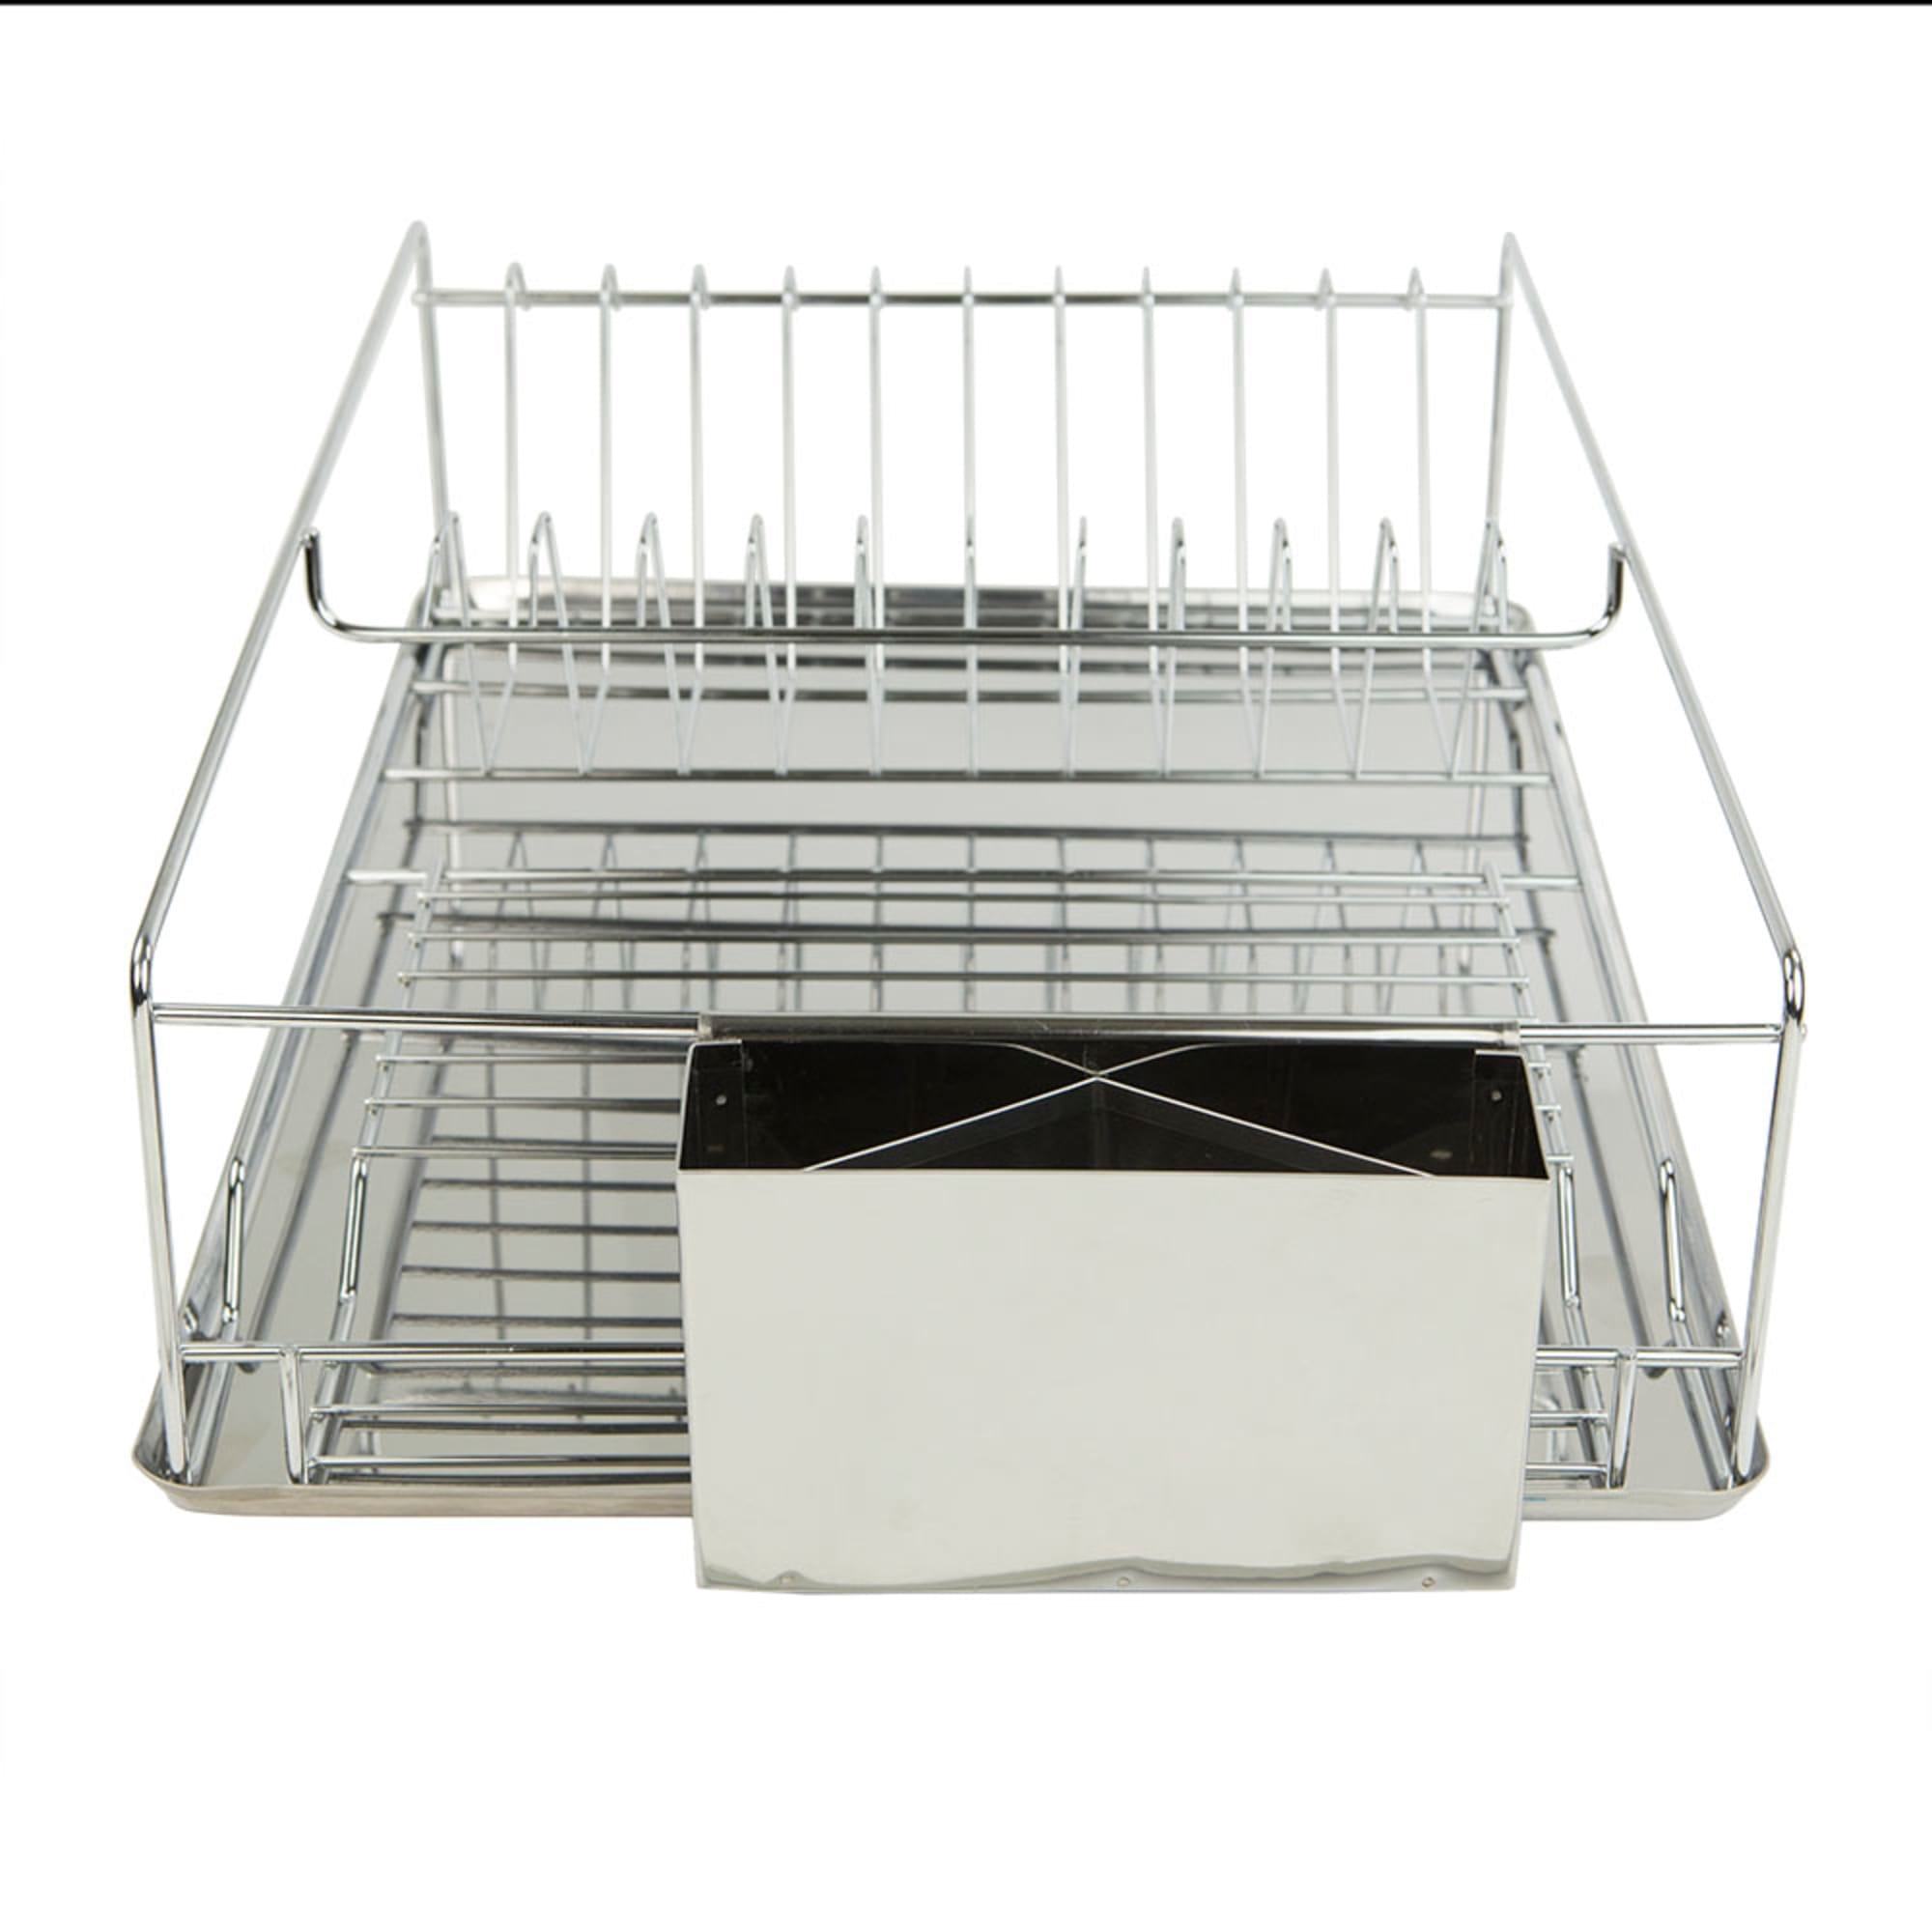 Home Basics Chrome Plated Steel Dish Rack with Tray $25.00 EACH, CASE PACK OF 6